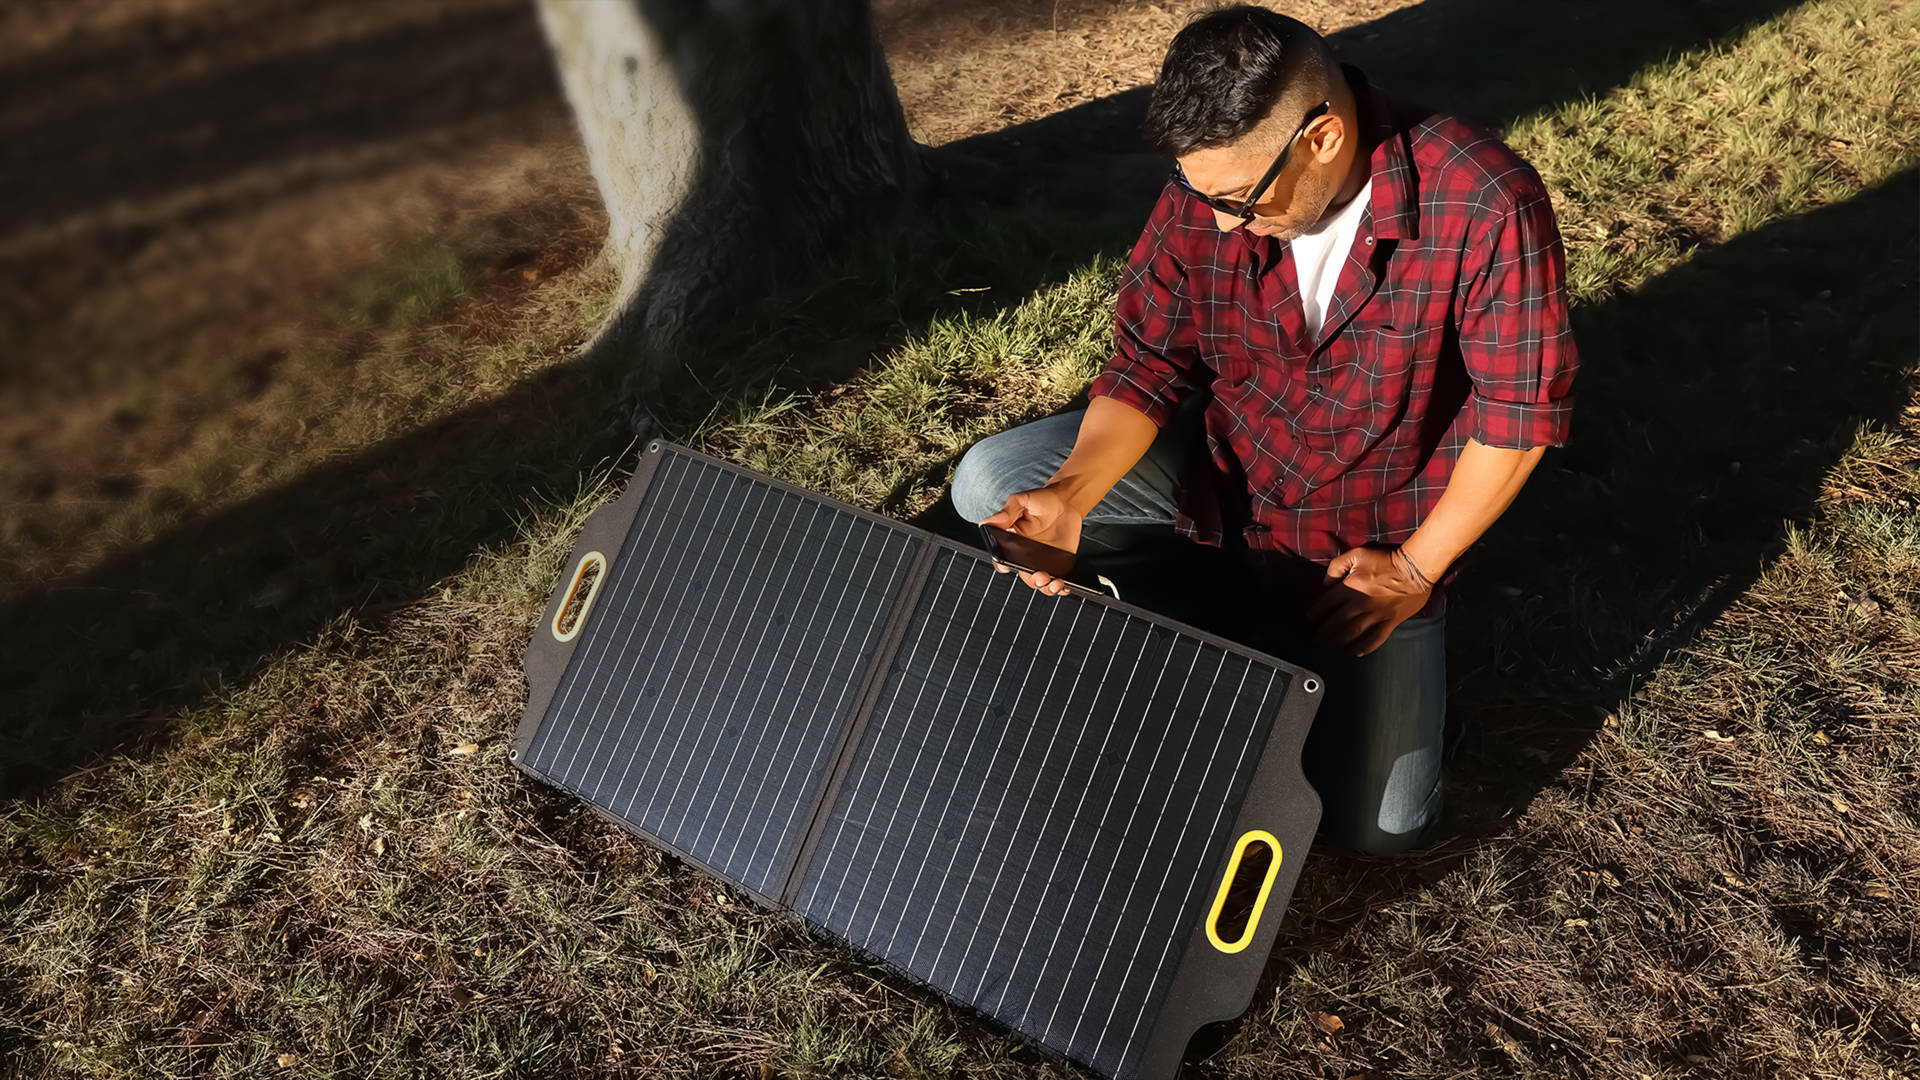 Powerness S80 Solar Panel: Man outdoors connecting cellphone to the solar panel using the USB-C cord option